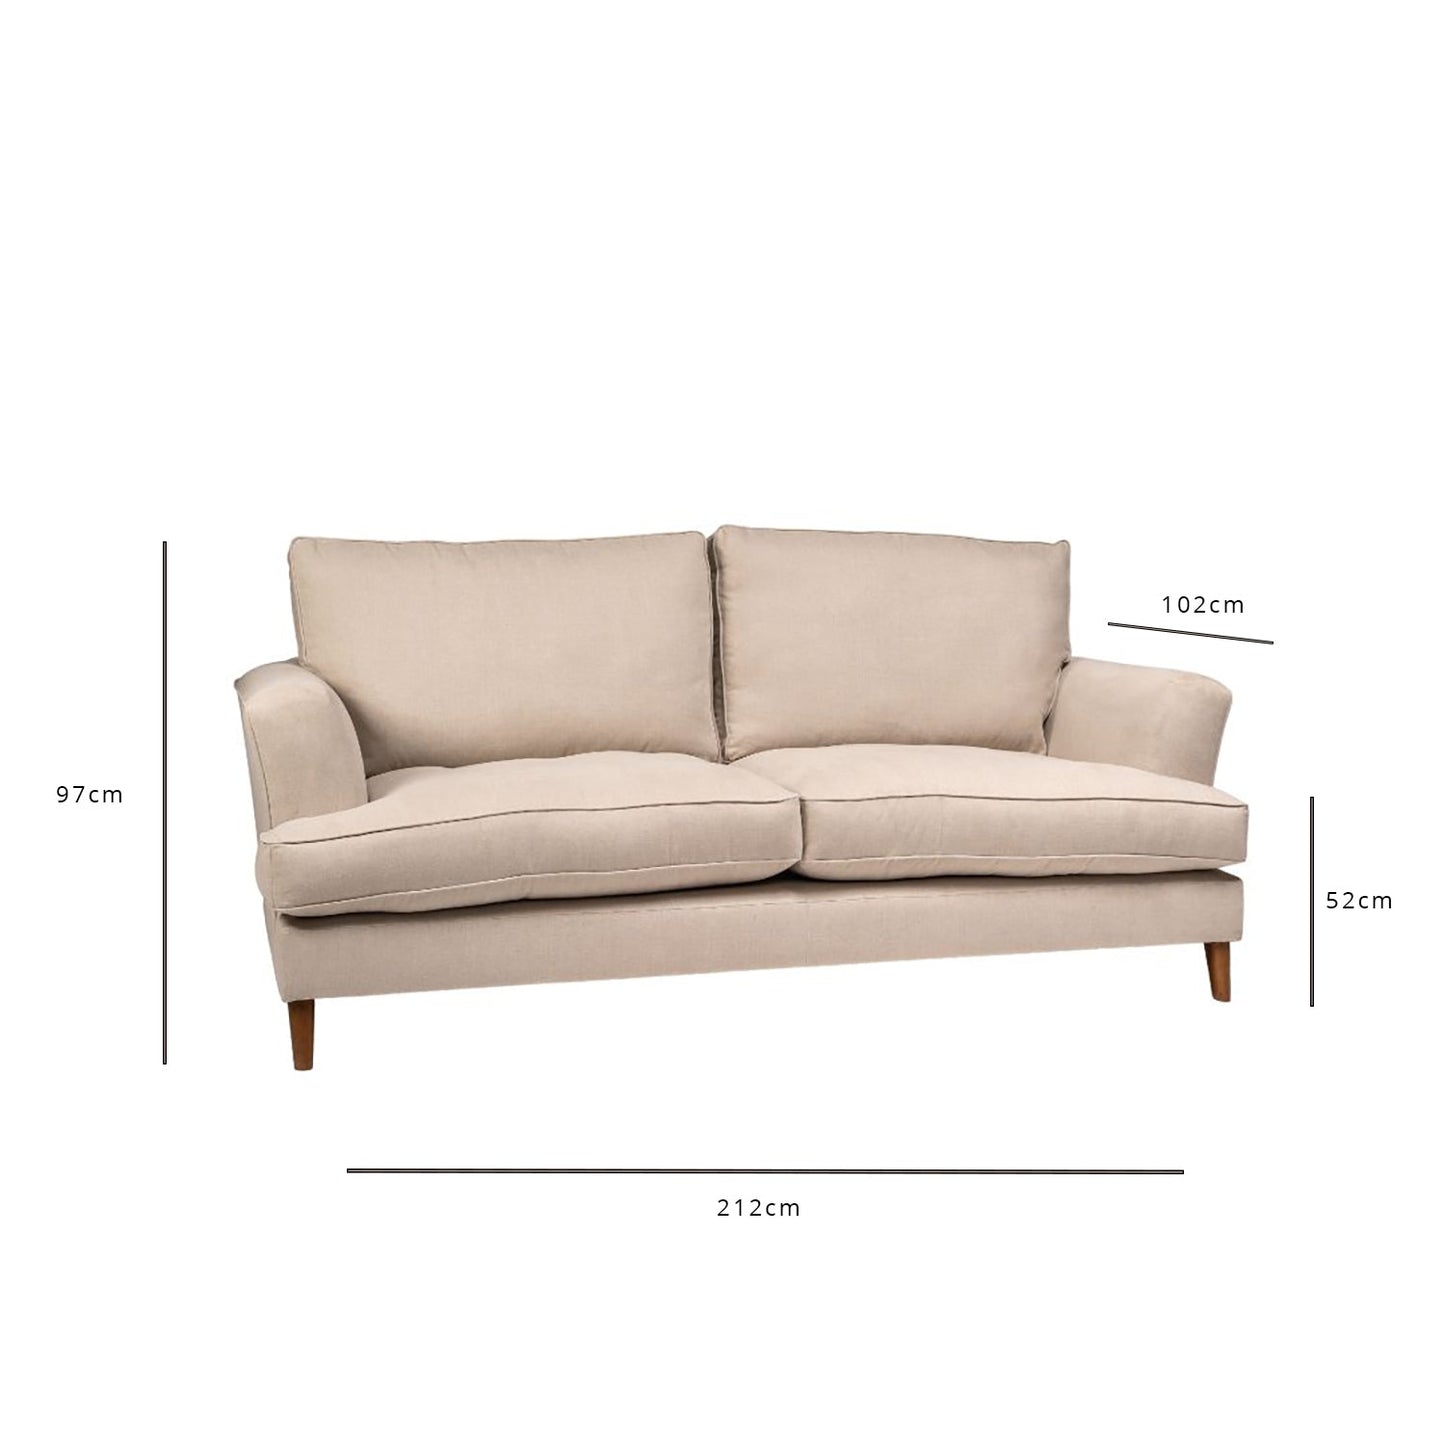 Frankie large sofa - 4 seater - Natural Clay